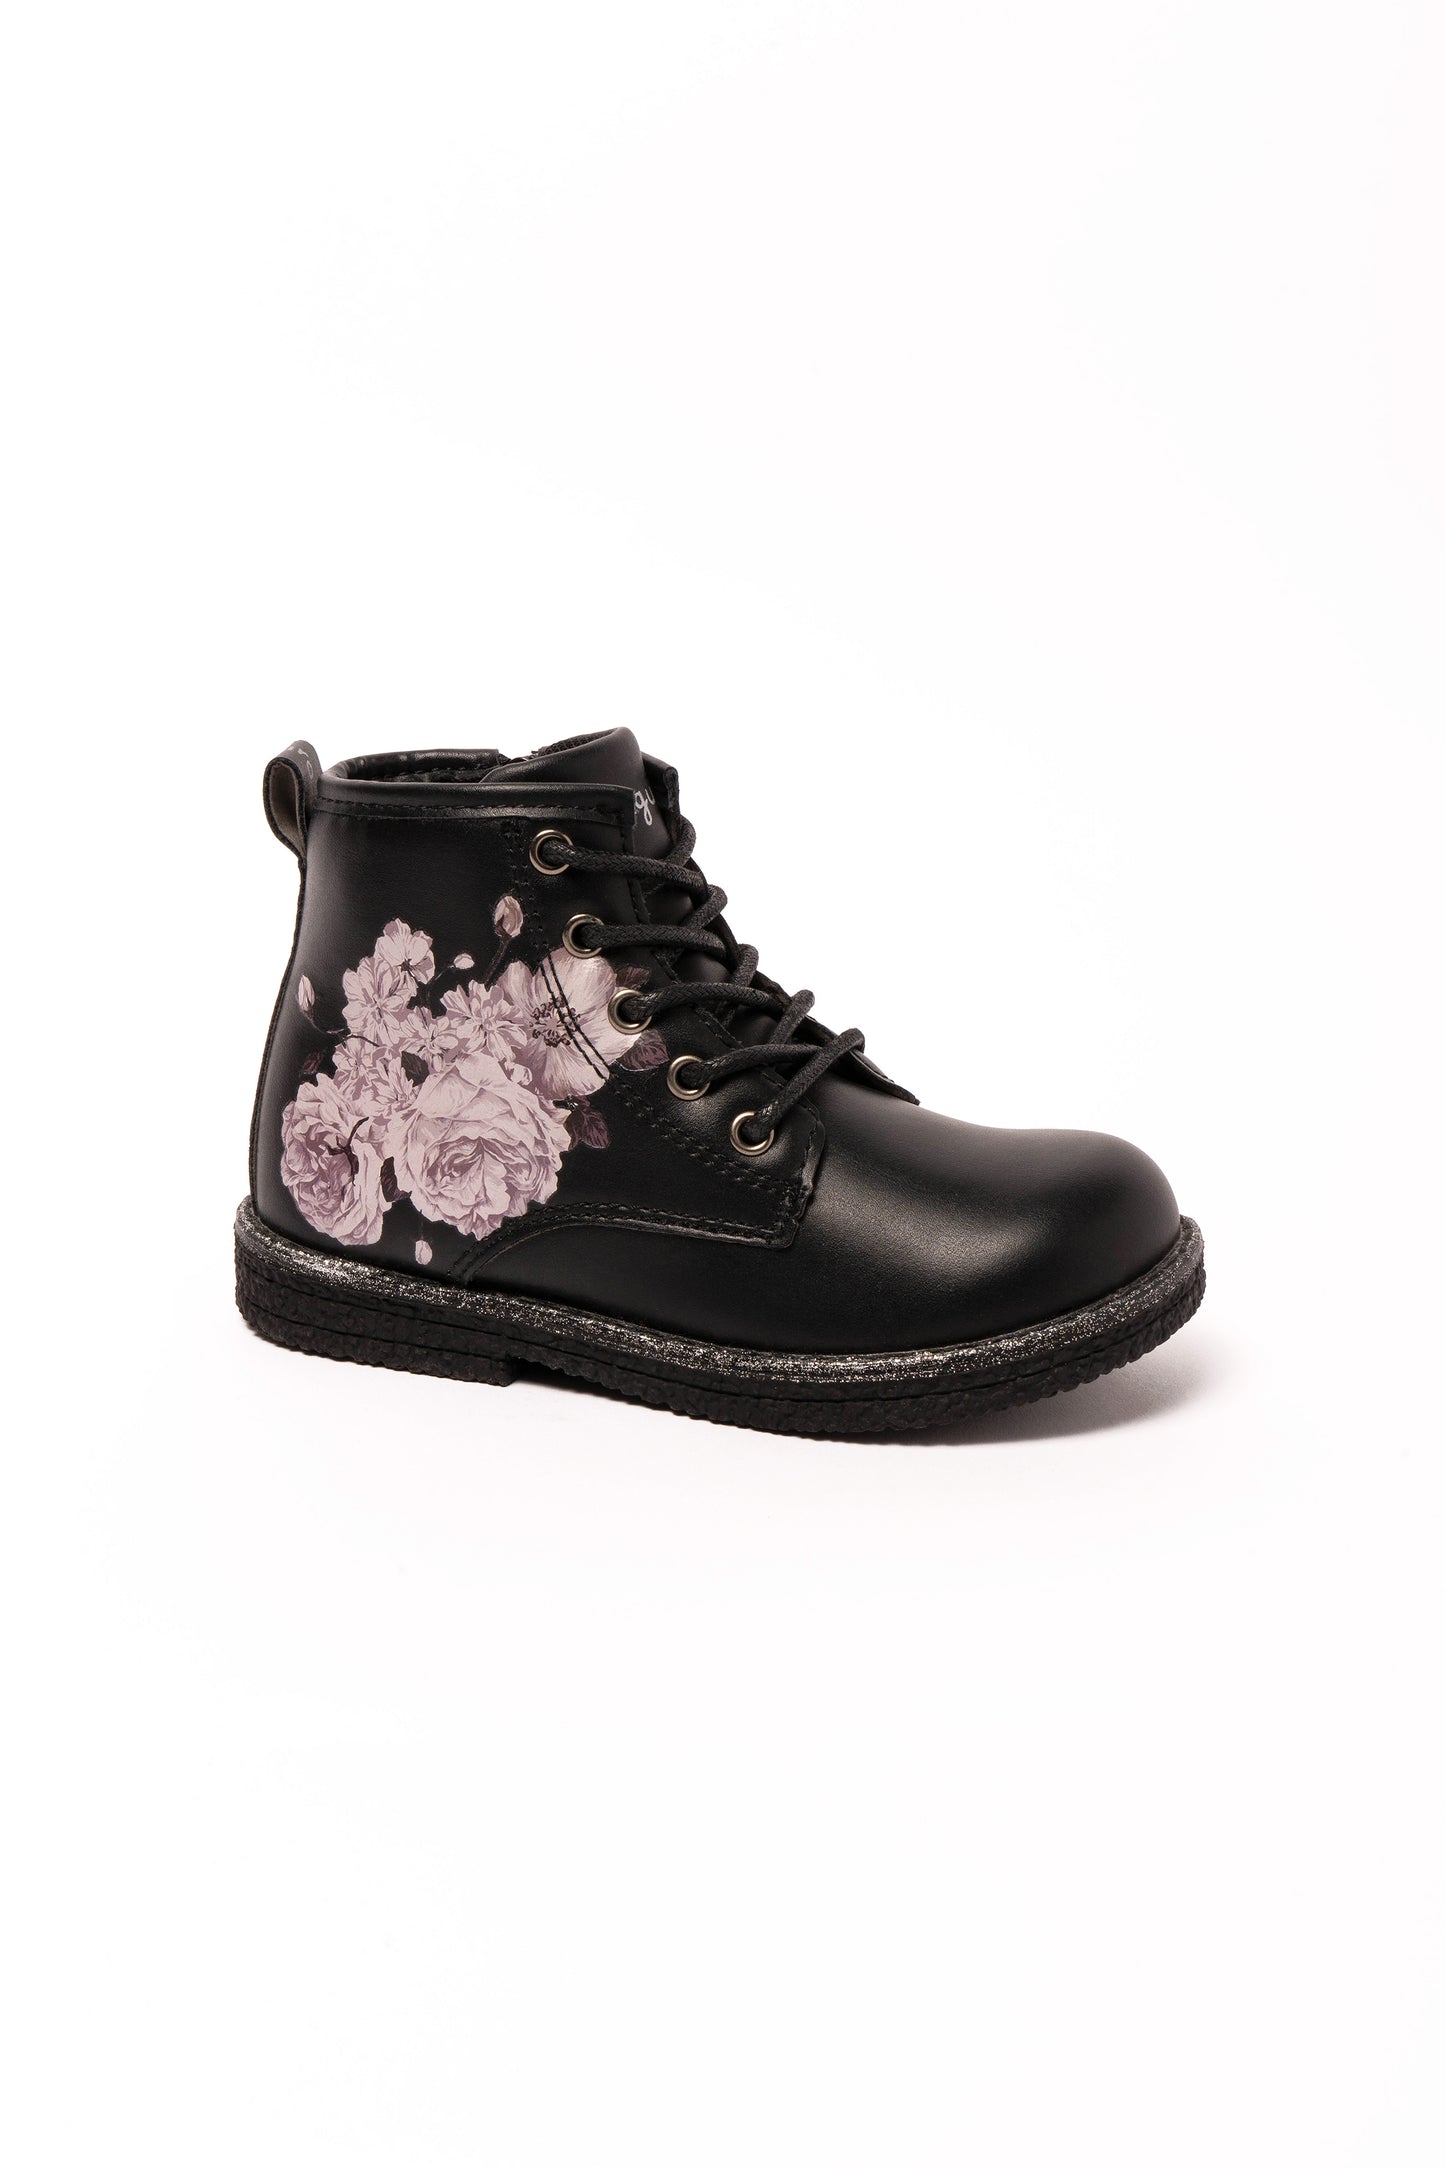 FLORA GIRLS ANKLE BOOT 24X30 SIZES